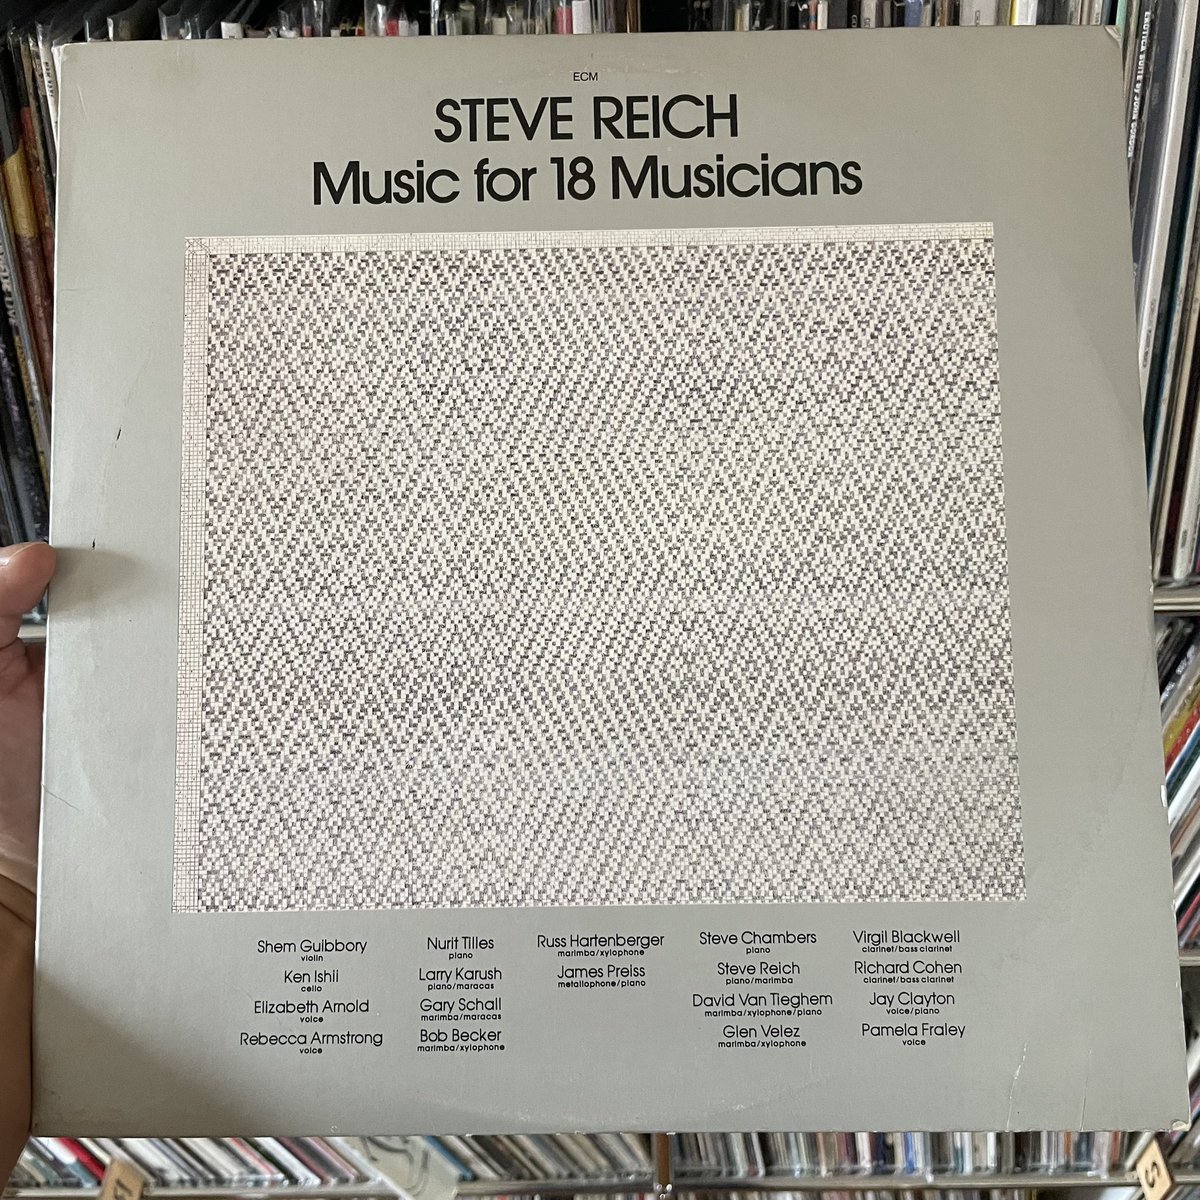 #NowPlaying Steve Reich - Music for 18 Musicians (ECM Records, US 1978).